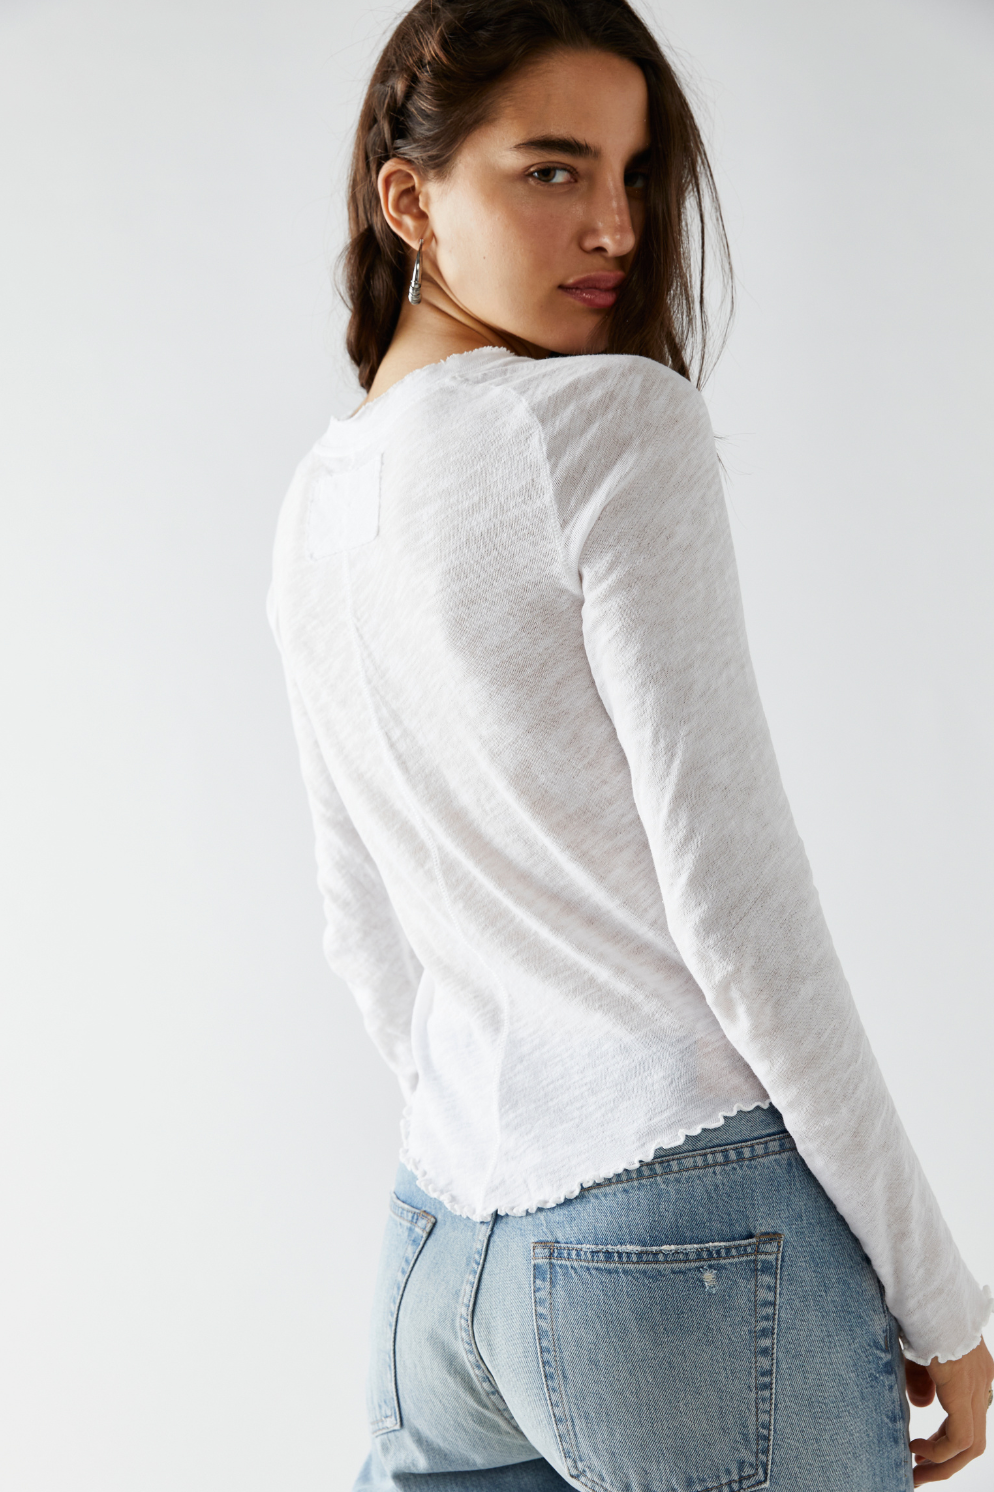 Free People Lettuce Edge White Cotton Be My Baby Long Sleeve Top